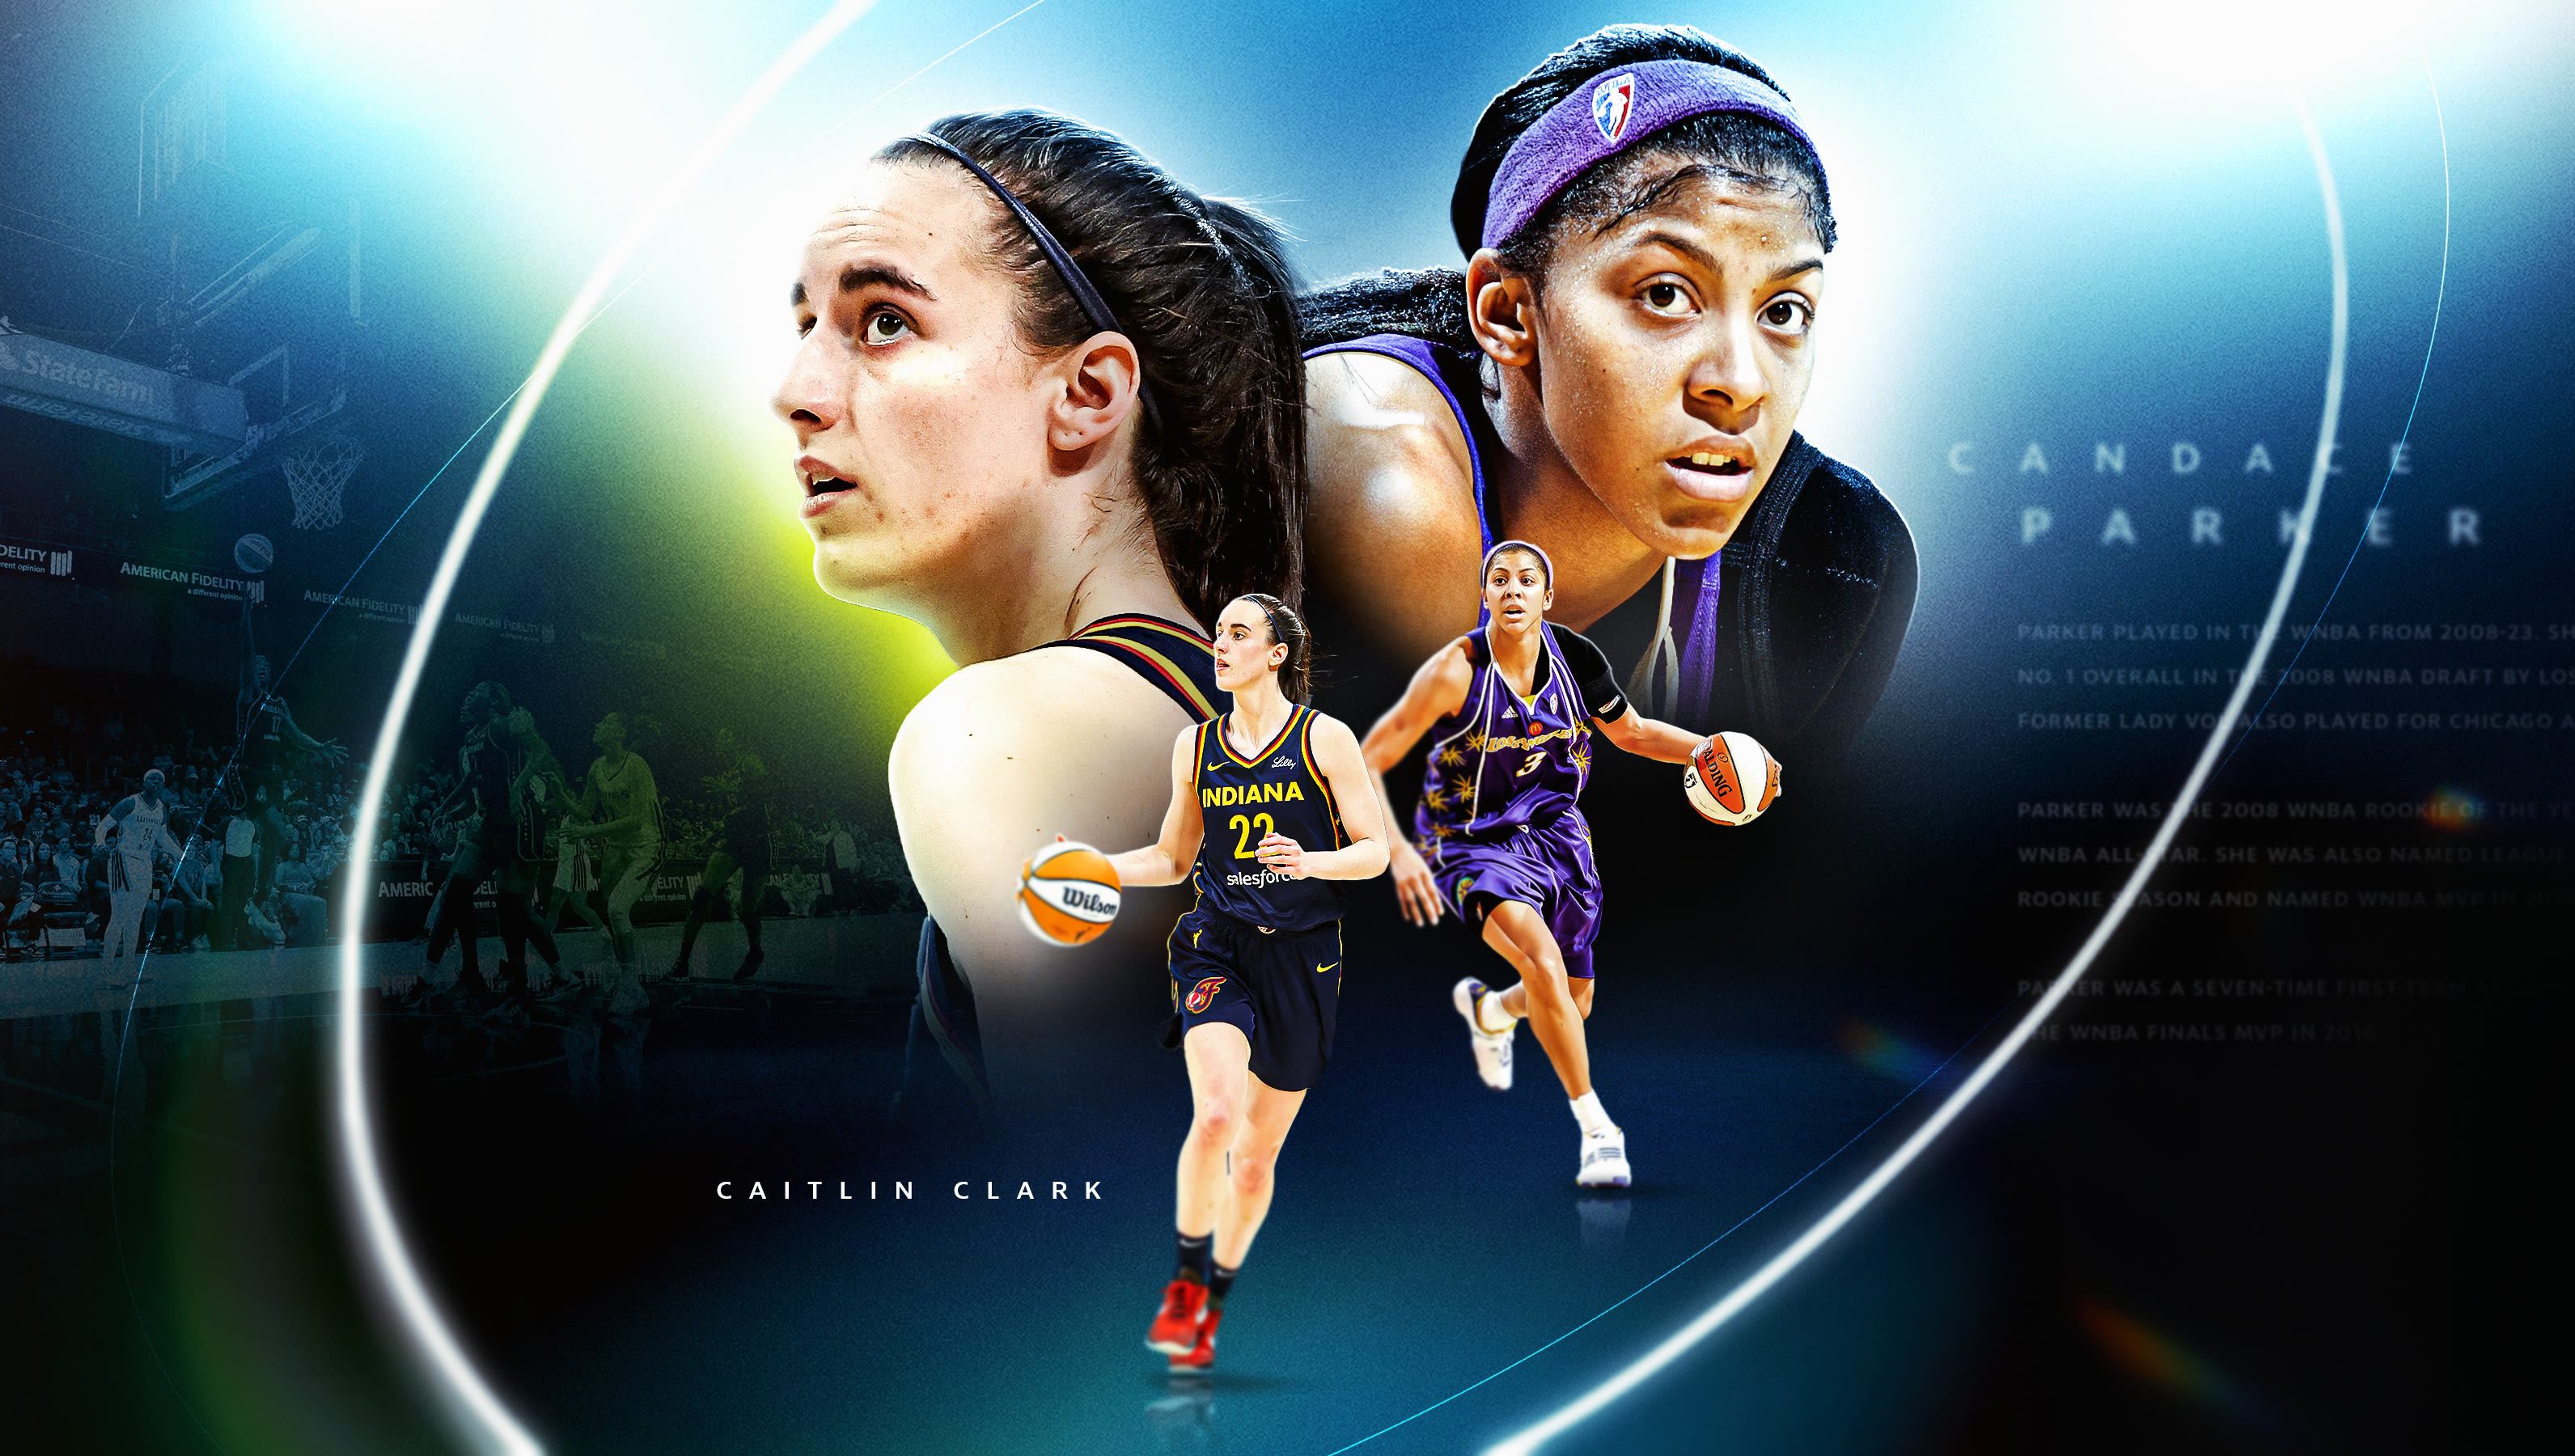 Caitlin Clark is chasing the legendary Candace Parker, but history says that won’t be easy